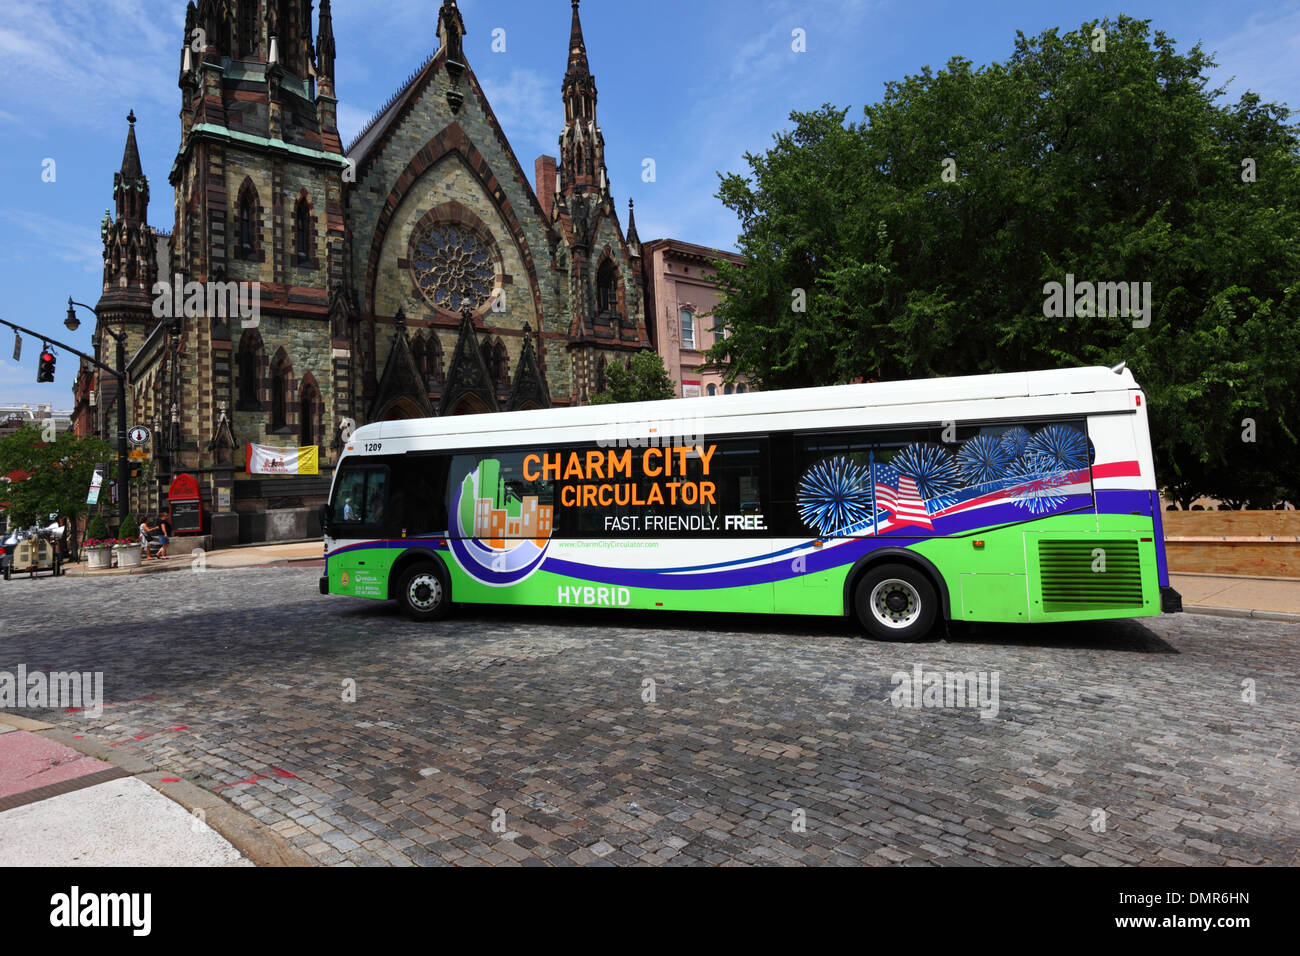 Charm City Circulator free public bus that uses hybrid fuel technology made by Orion International, Baltimore, Maryland, USA Stock Photo